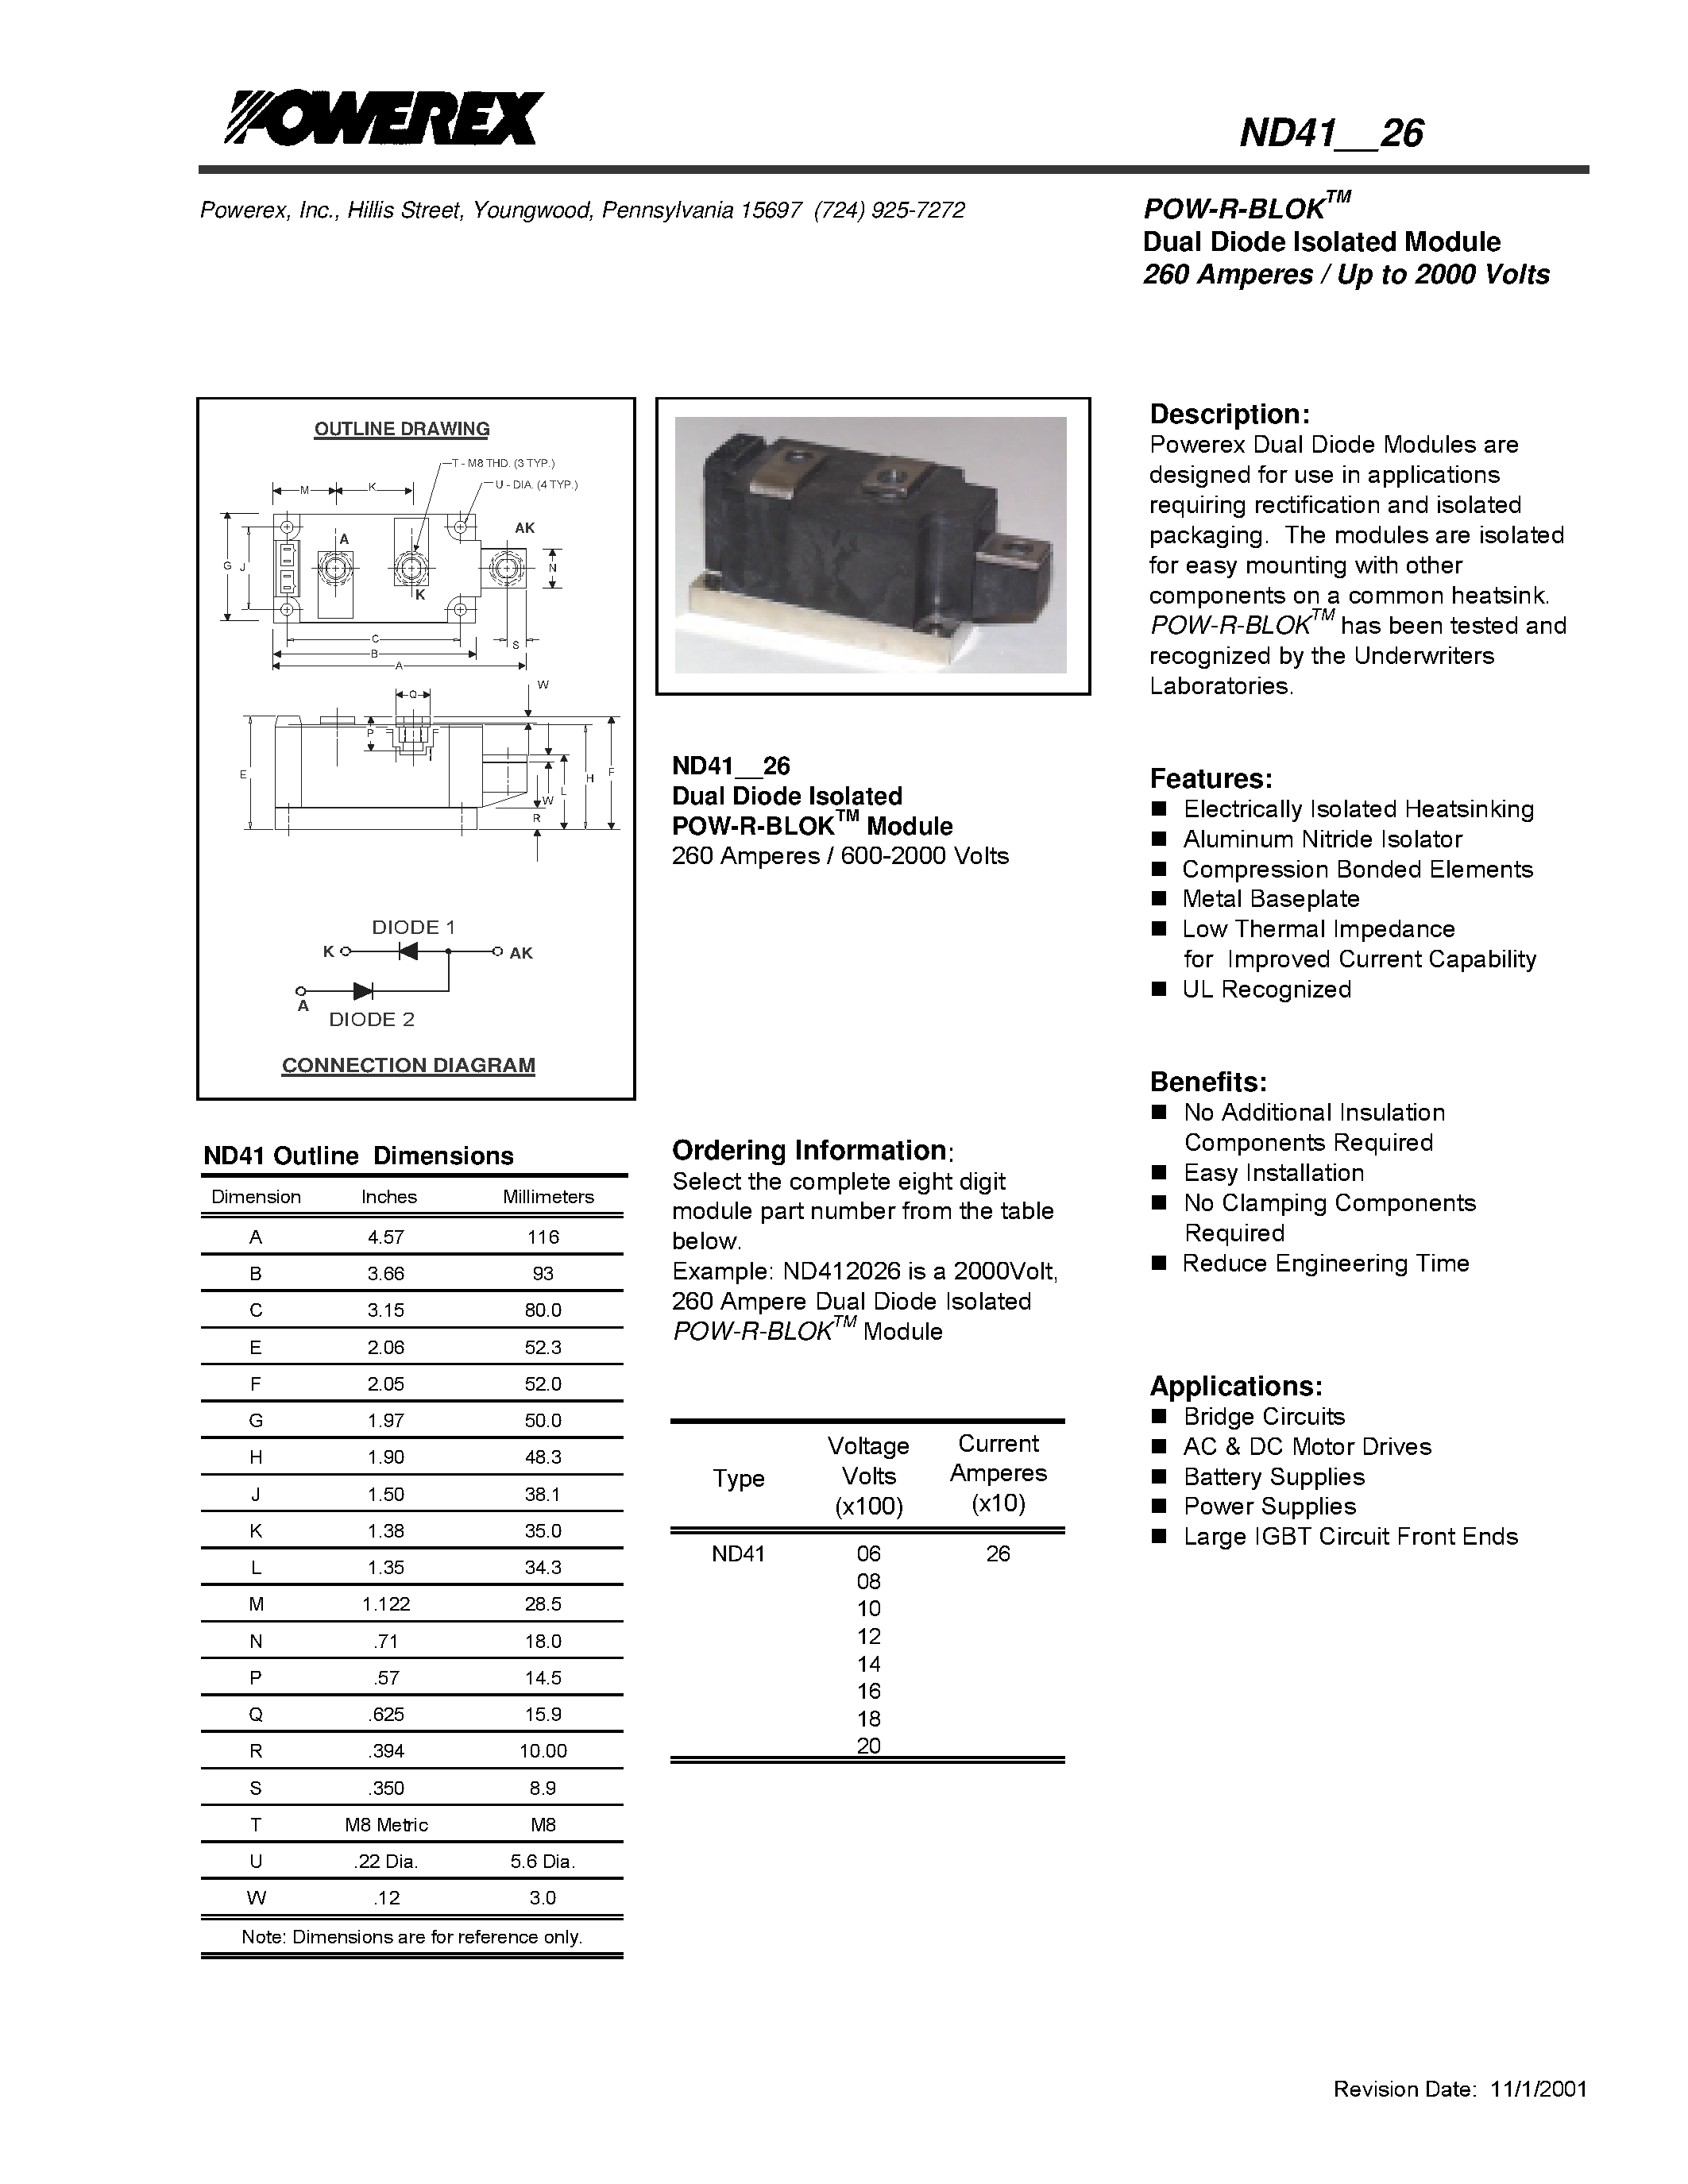 Datasheet ND410826 - POW-R-BLOK Dual Diode Isolated Module (260 Amperes / Up to 2000 Volts) page 1